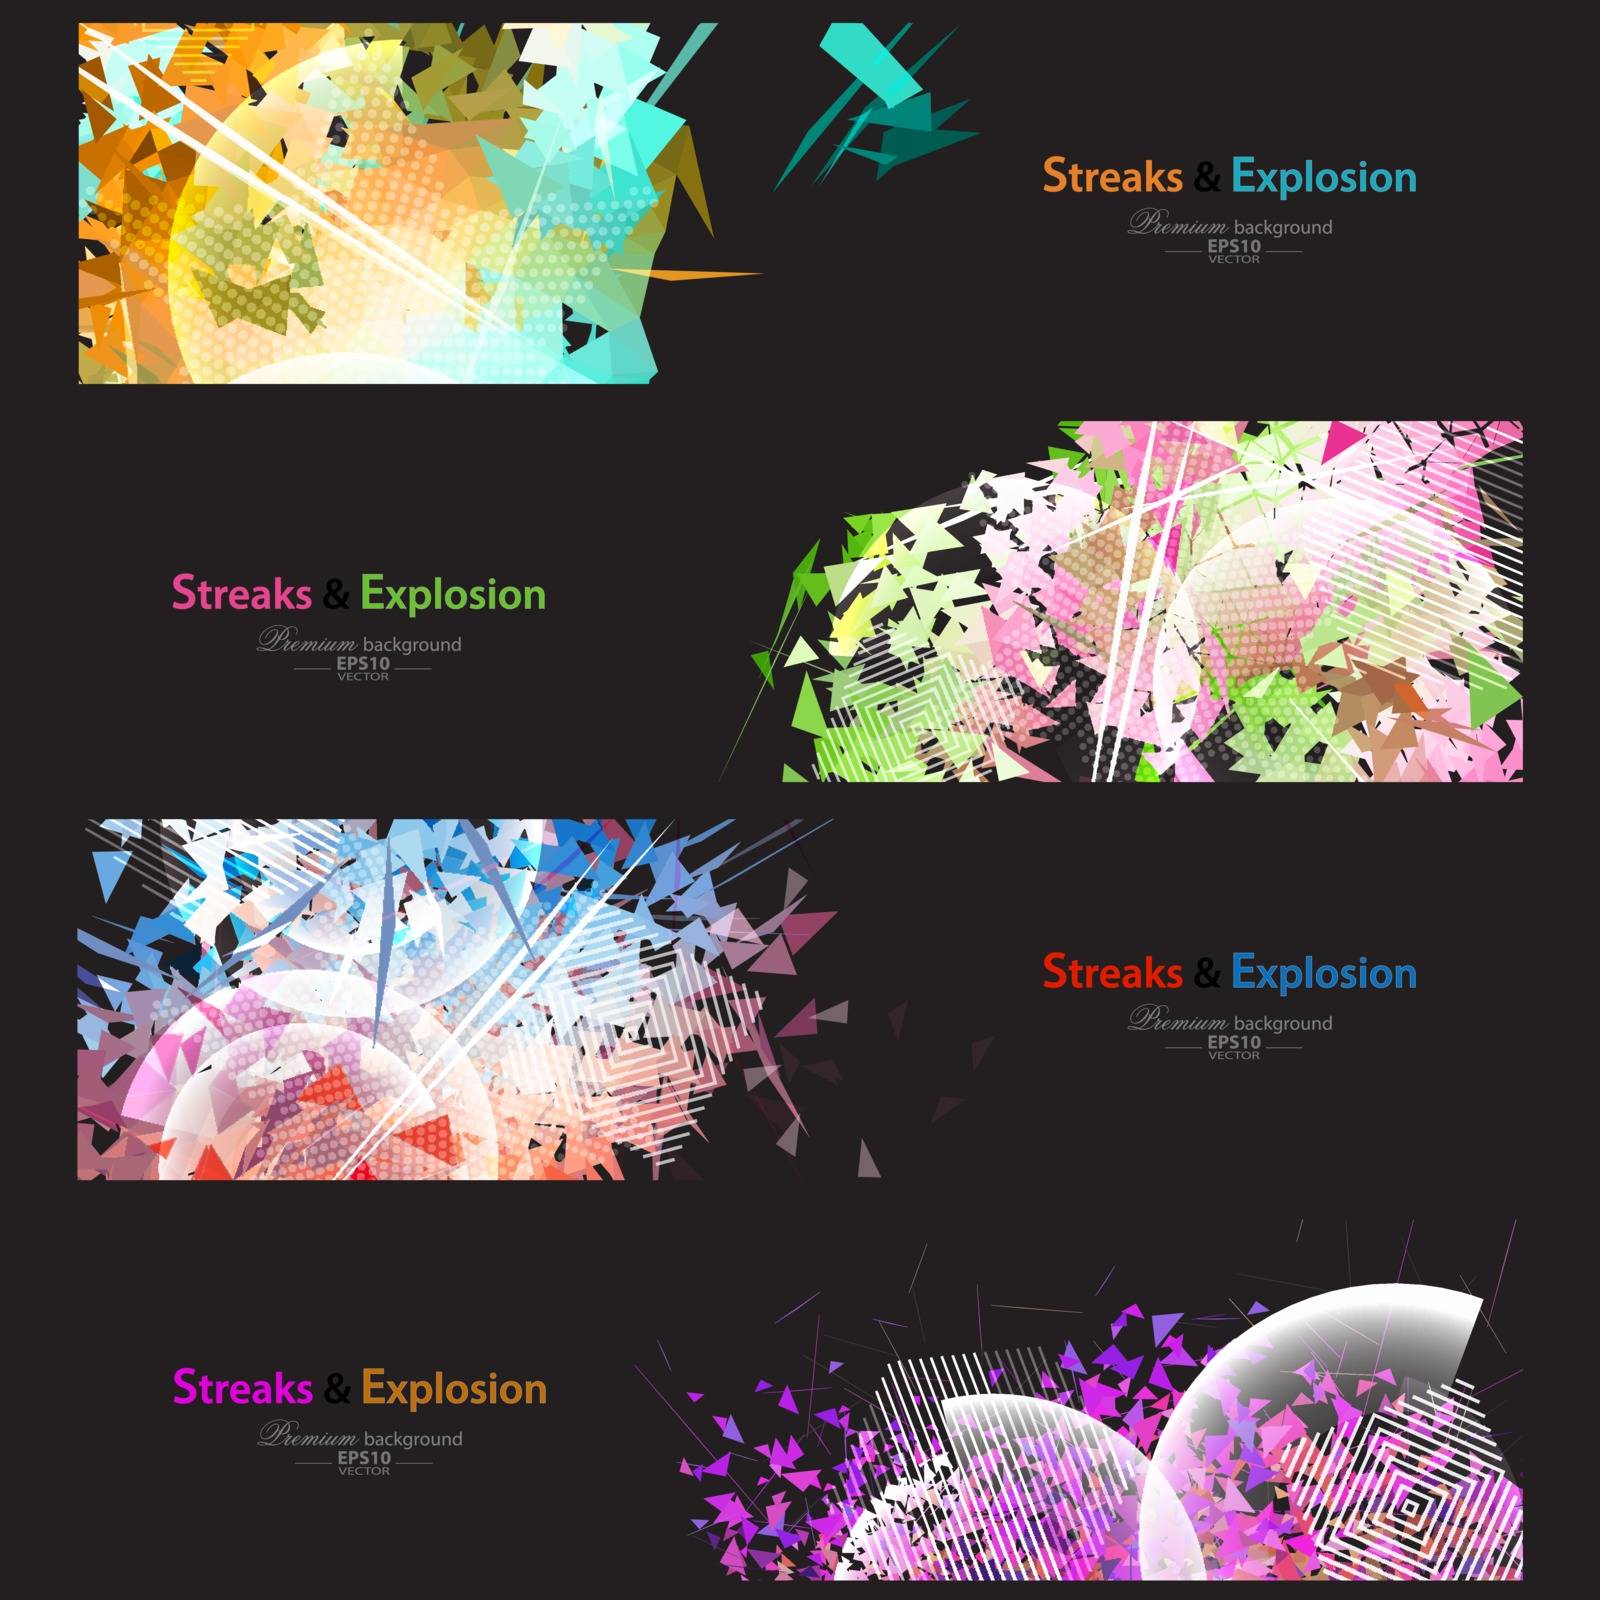 Streaks and explosion banner set by stocklady